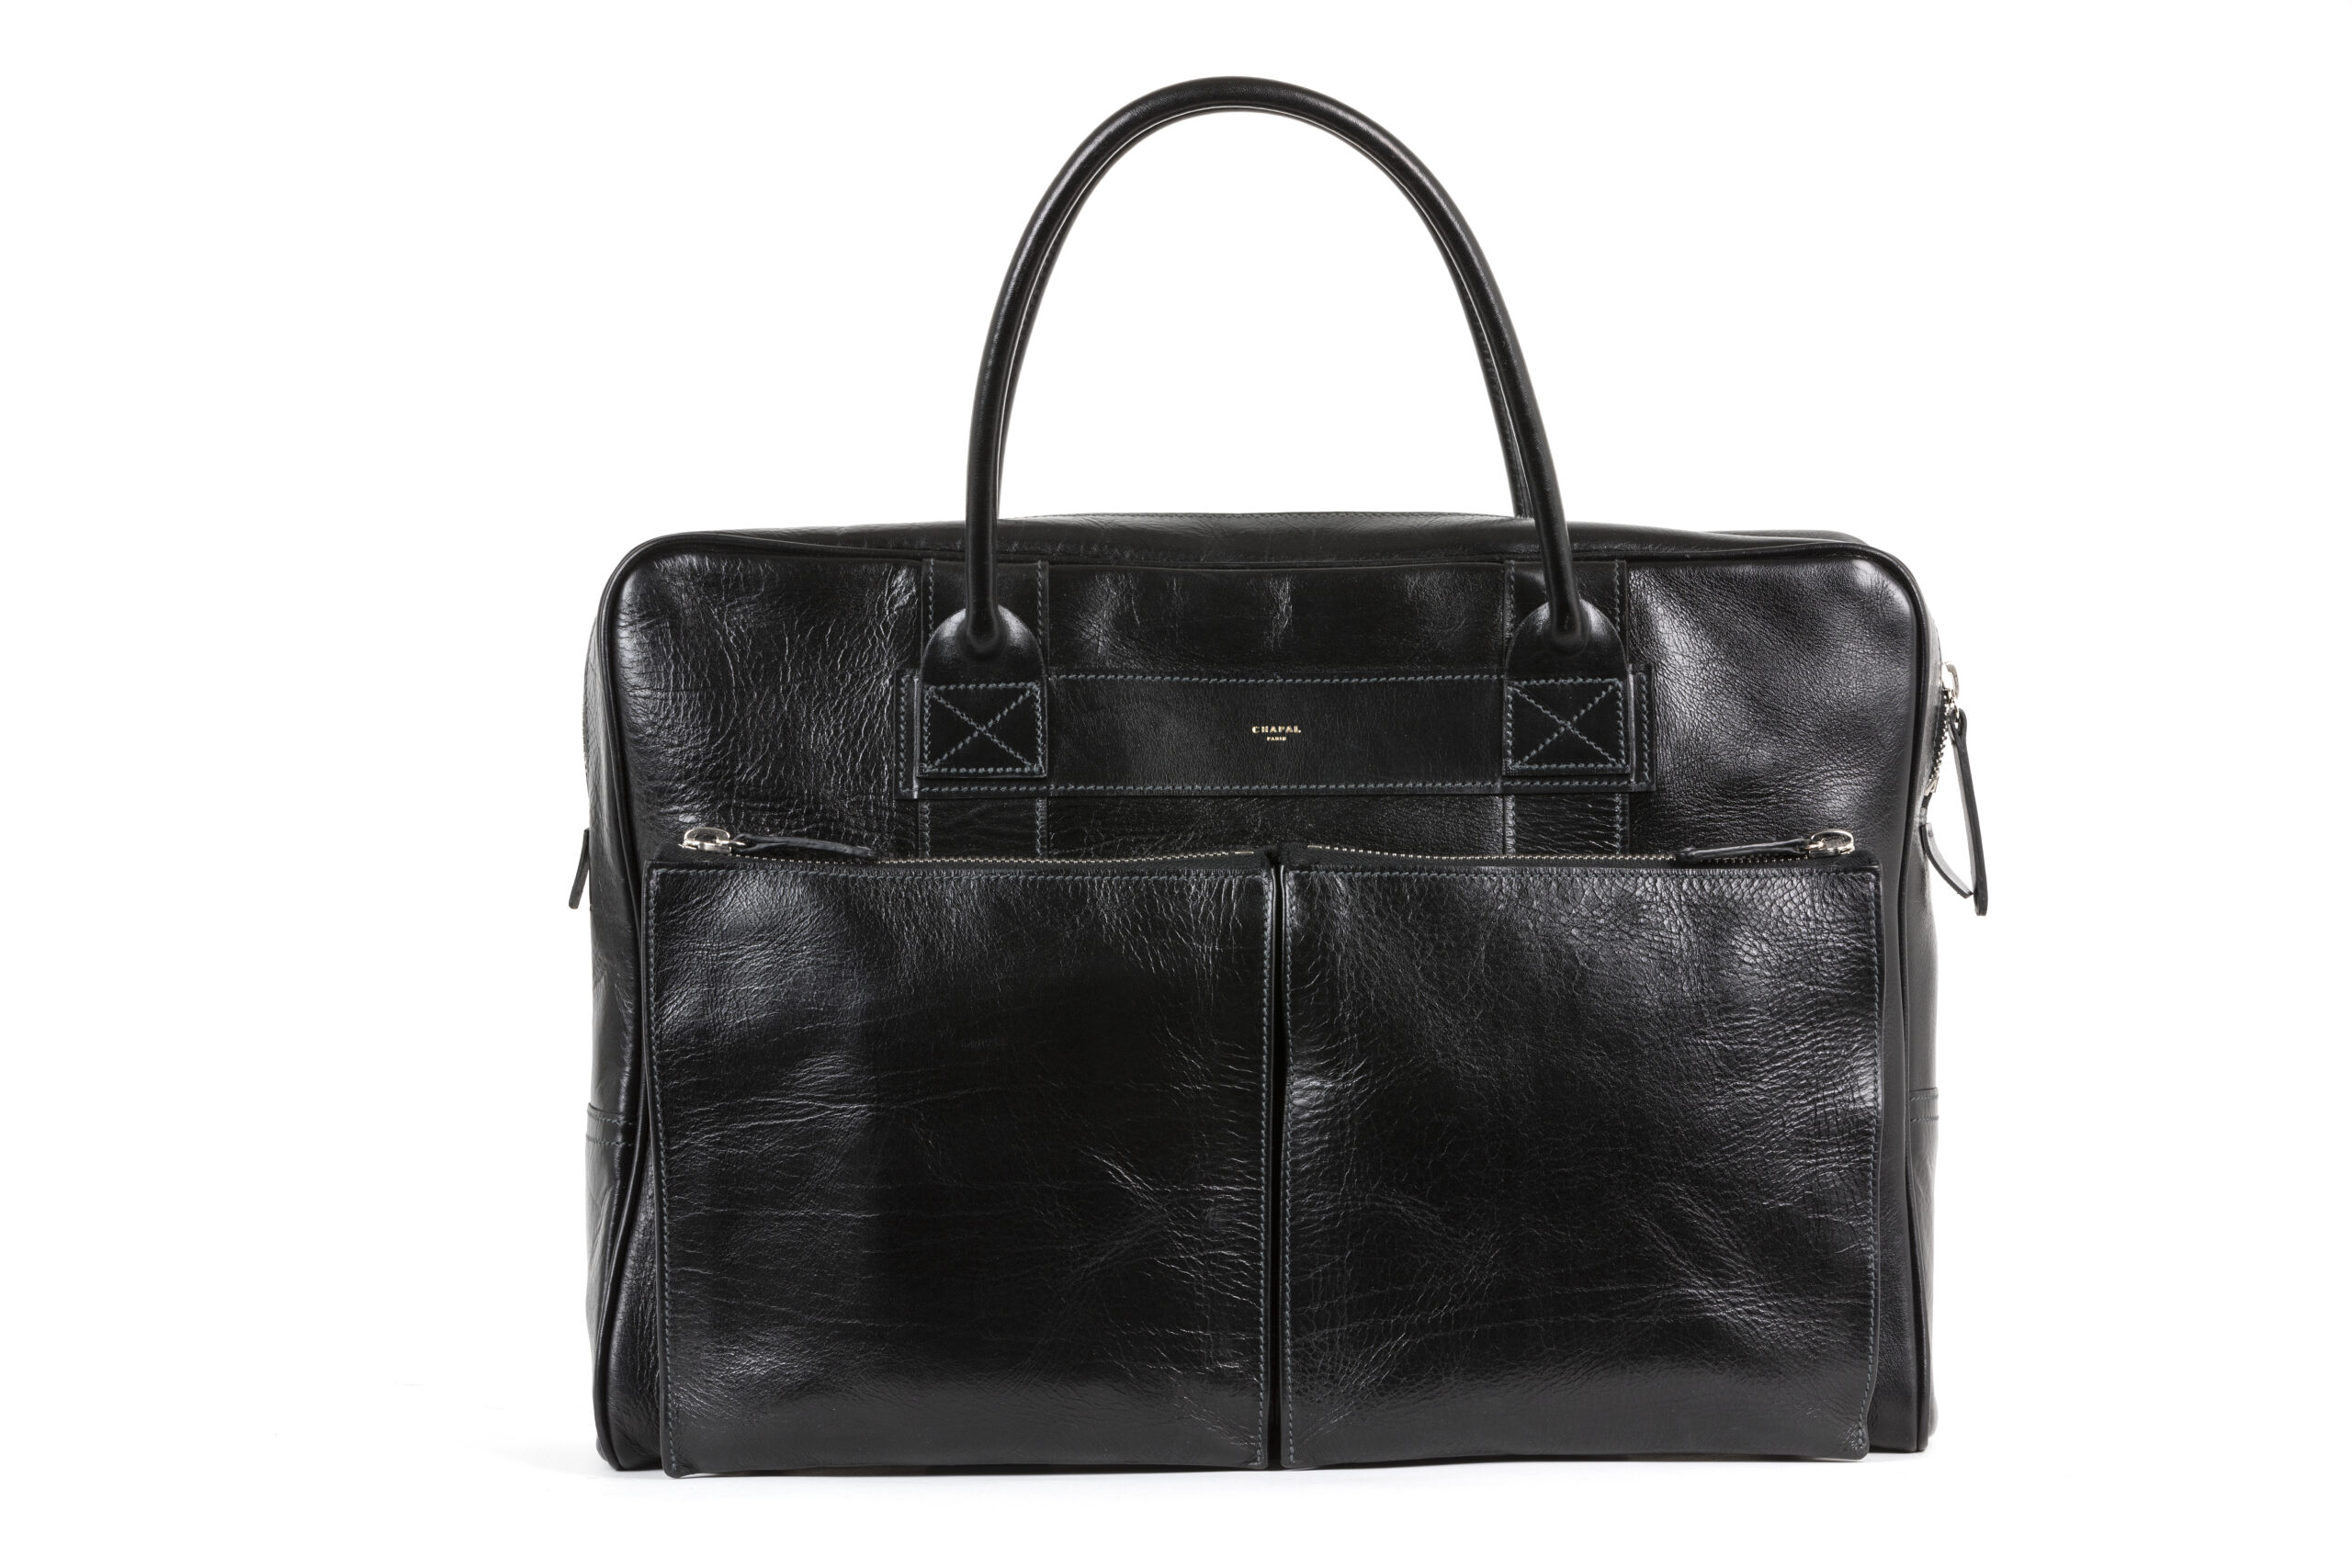 Captain Briefcase - Glossy leather - Black color